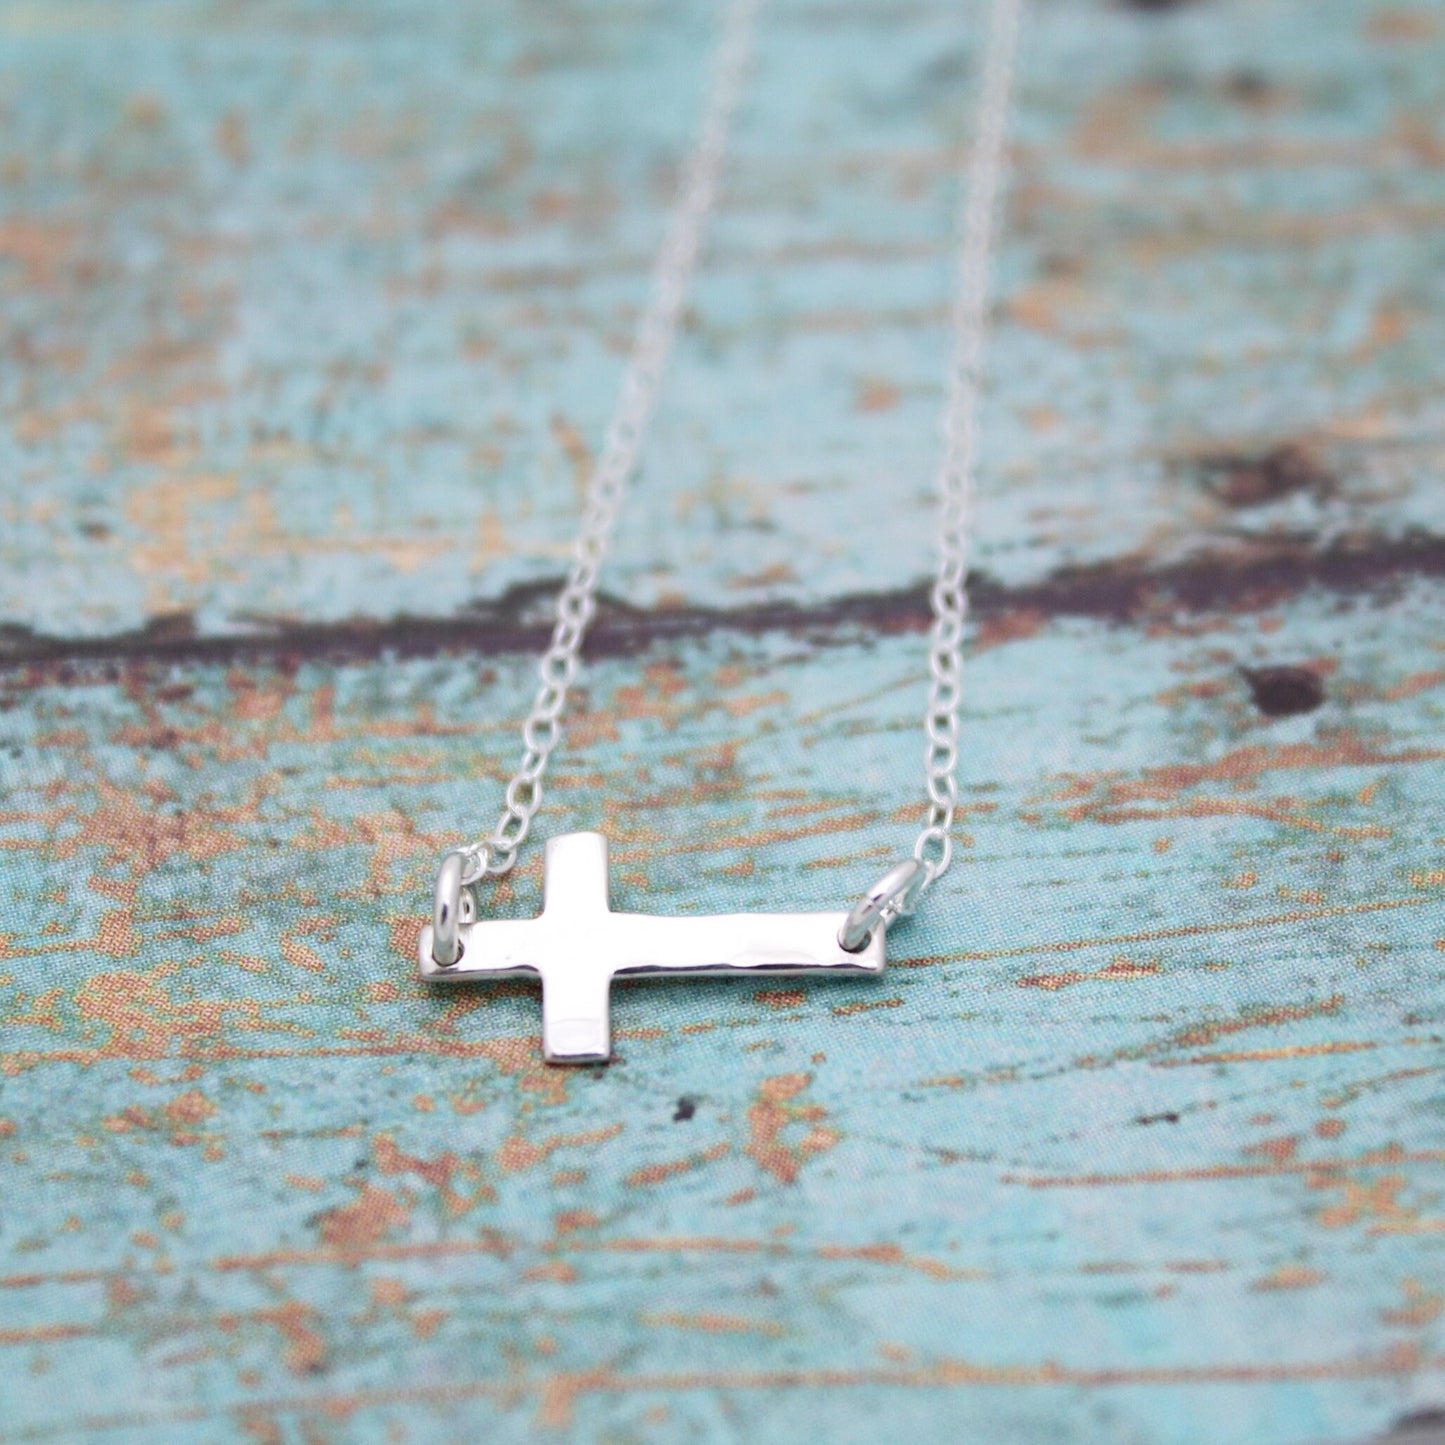 Horizontal Necklace Sterling Silver, Arrow Necklace, Sideway Cross Necklace, Angel Wing Necklace, Eternity Ring Necklace, Mountain Necklace